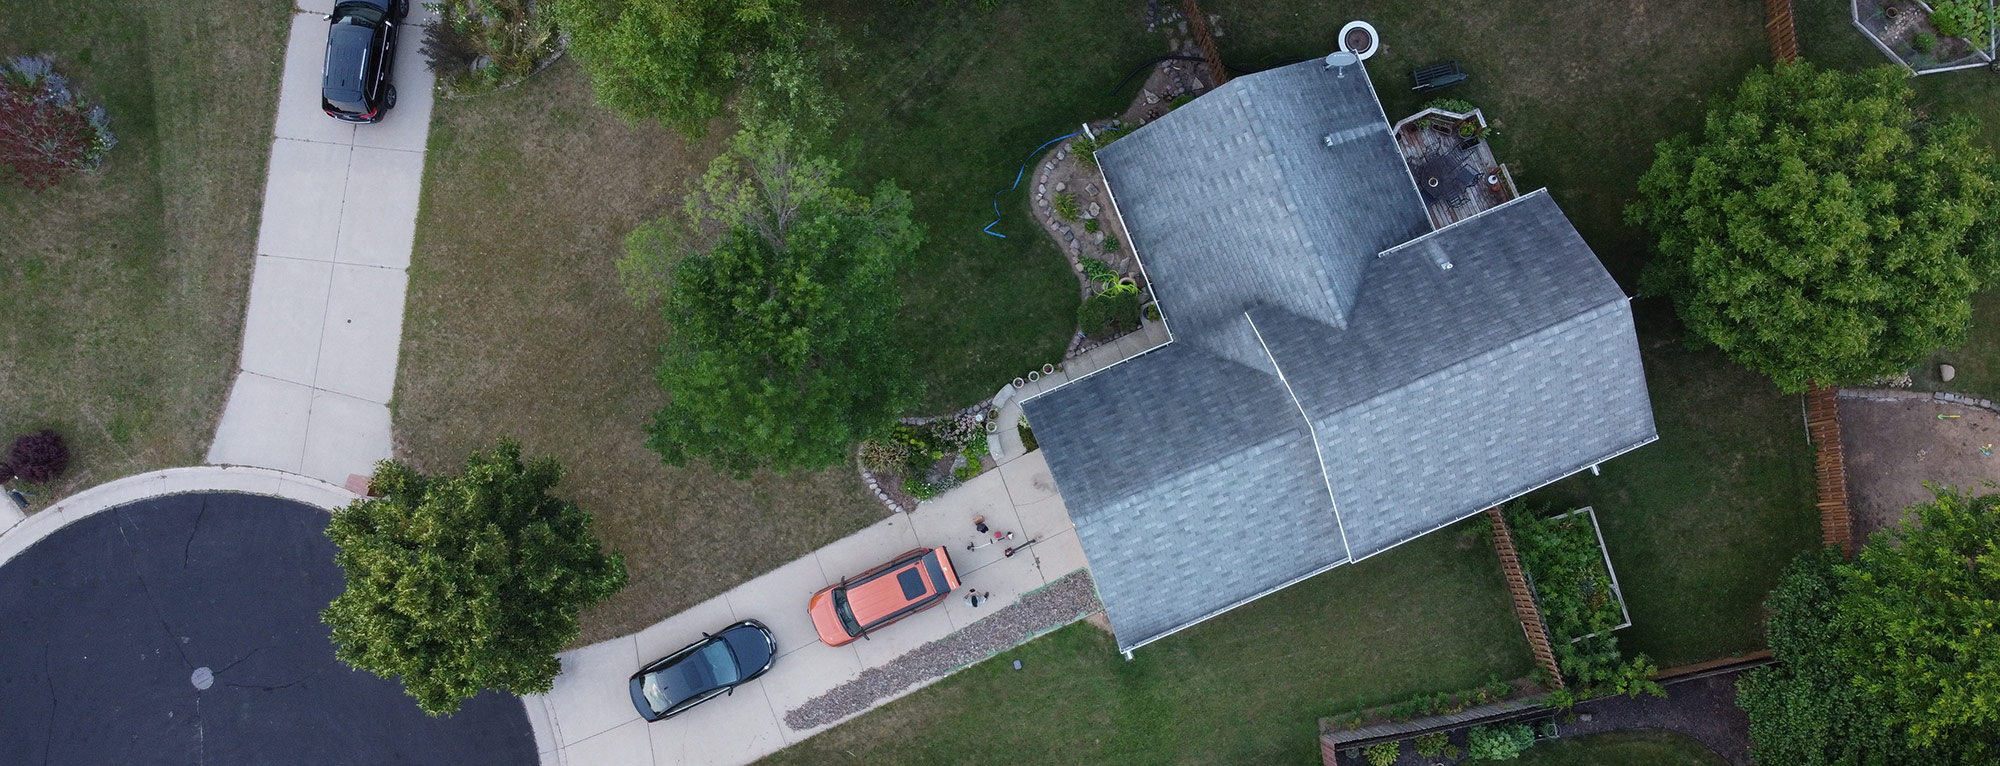 Aerial shot of a home being inspected.